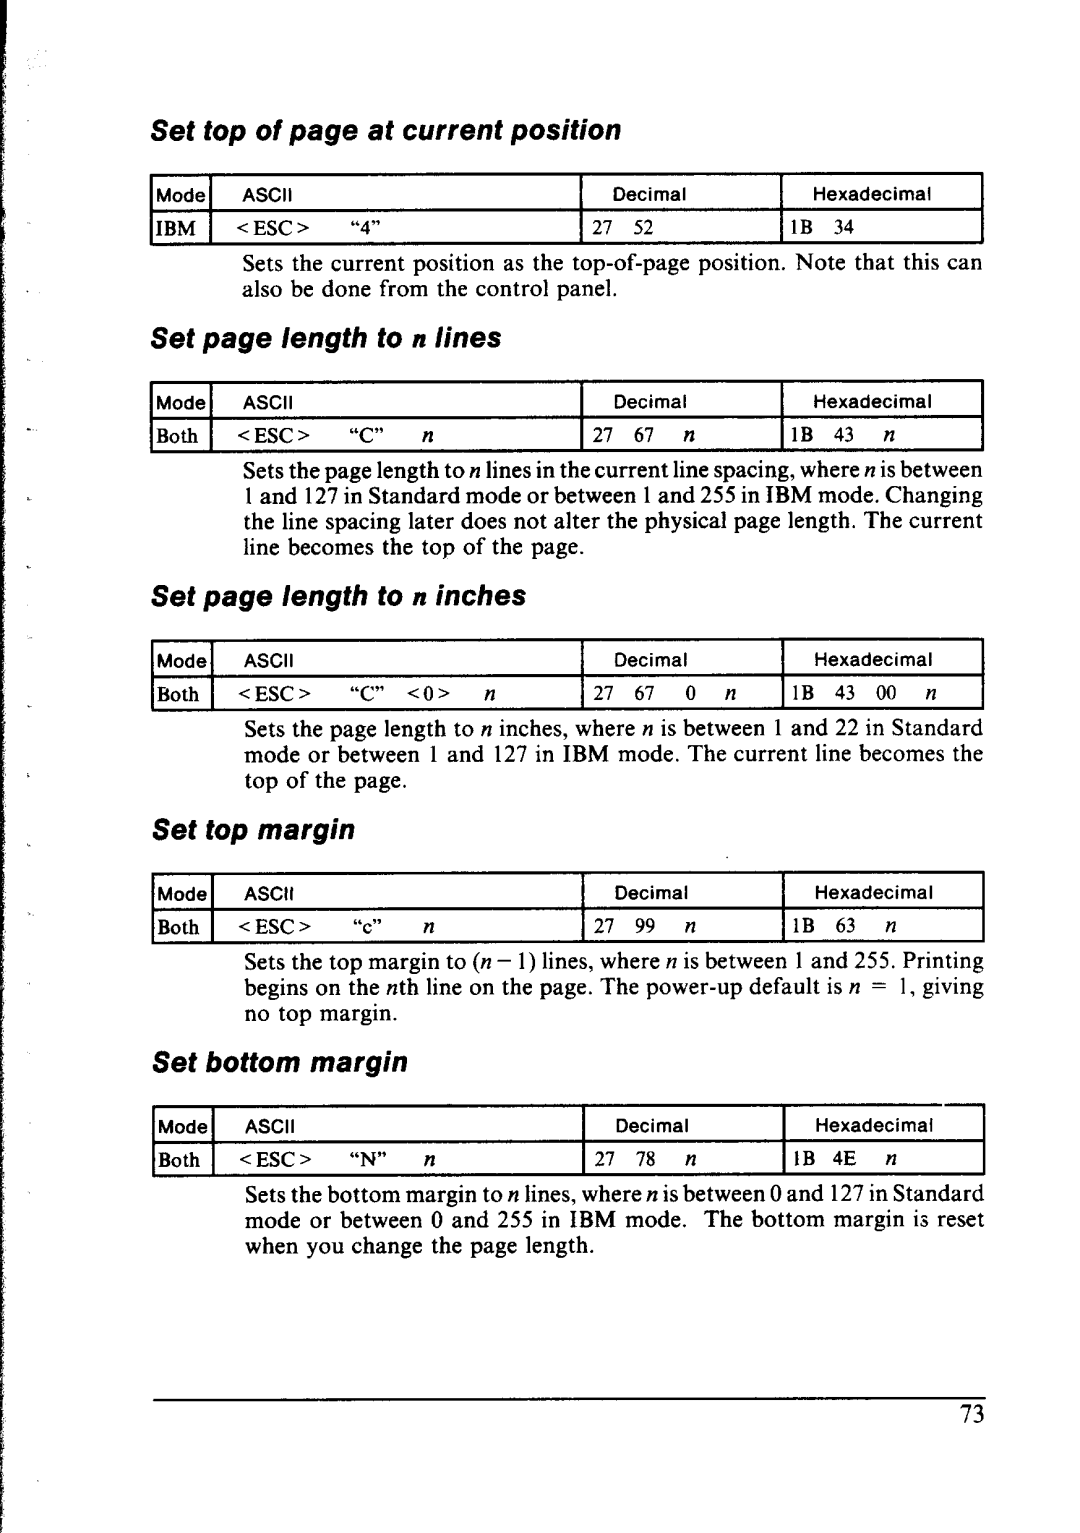 Star Micronics NX-1000 manual Set top of page at current position, Set page length to n lines, Set page length to n inches 